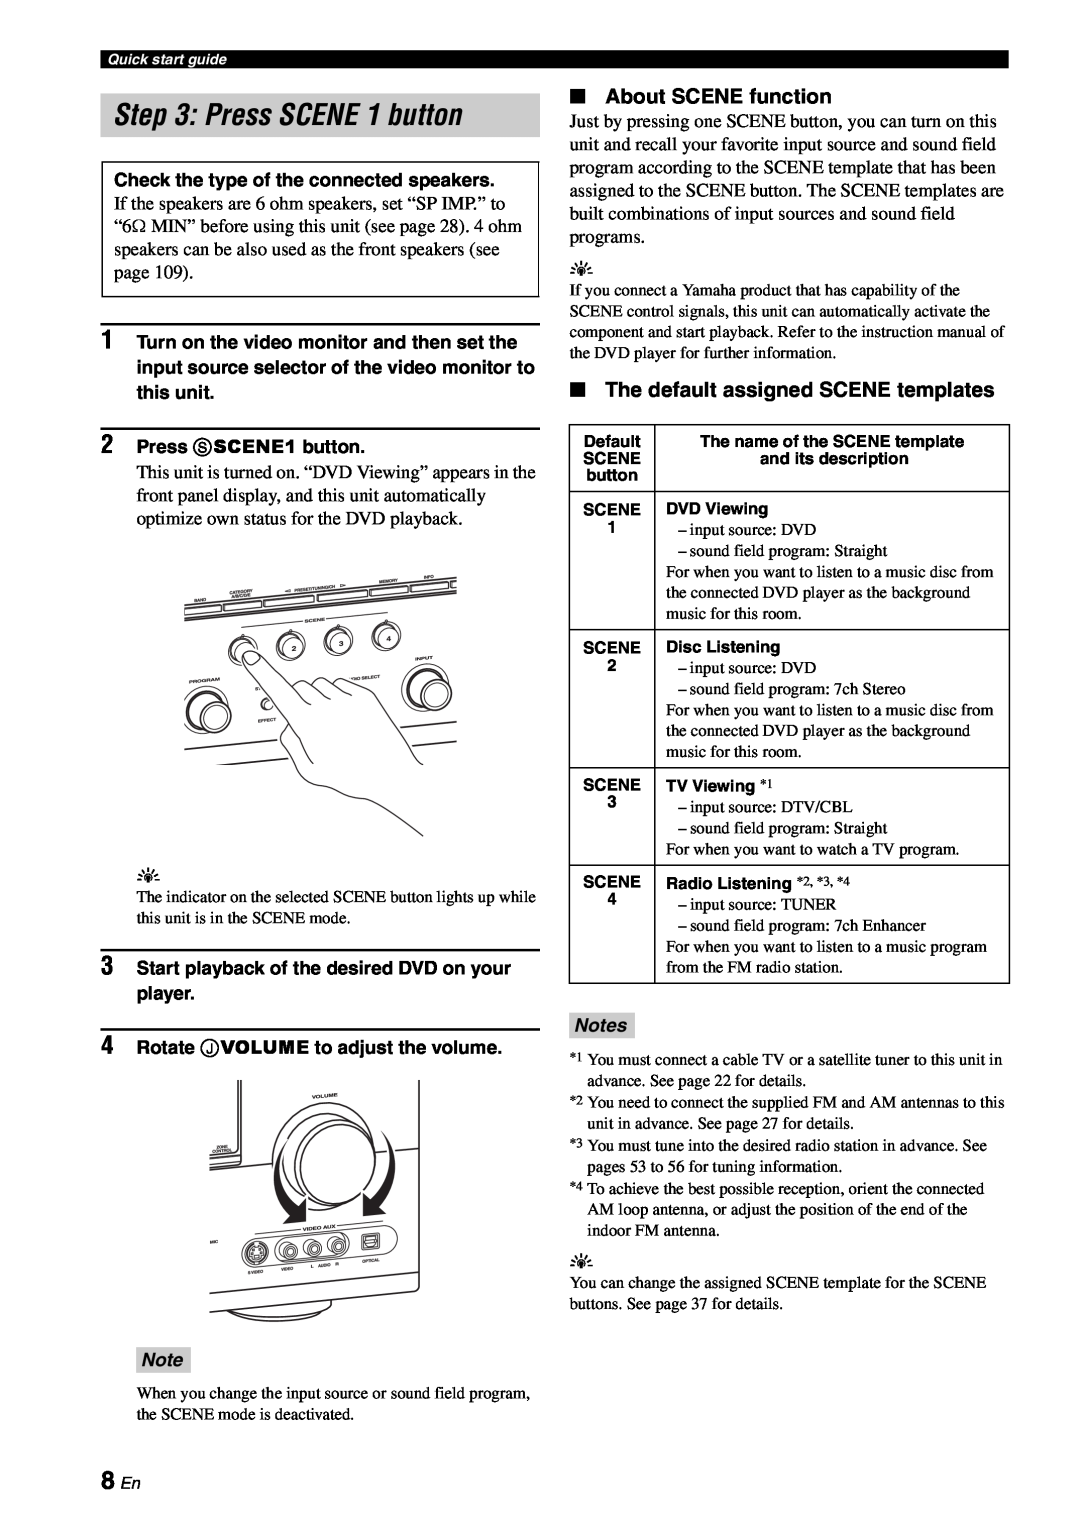 Yamaha RX-V863 owner manual 8 En, About SCENE function, The default assigned SCENE templates, Press SCENE 1 button, Notes 